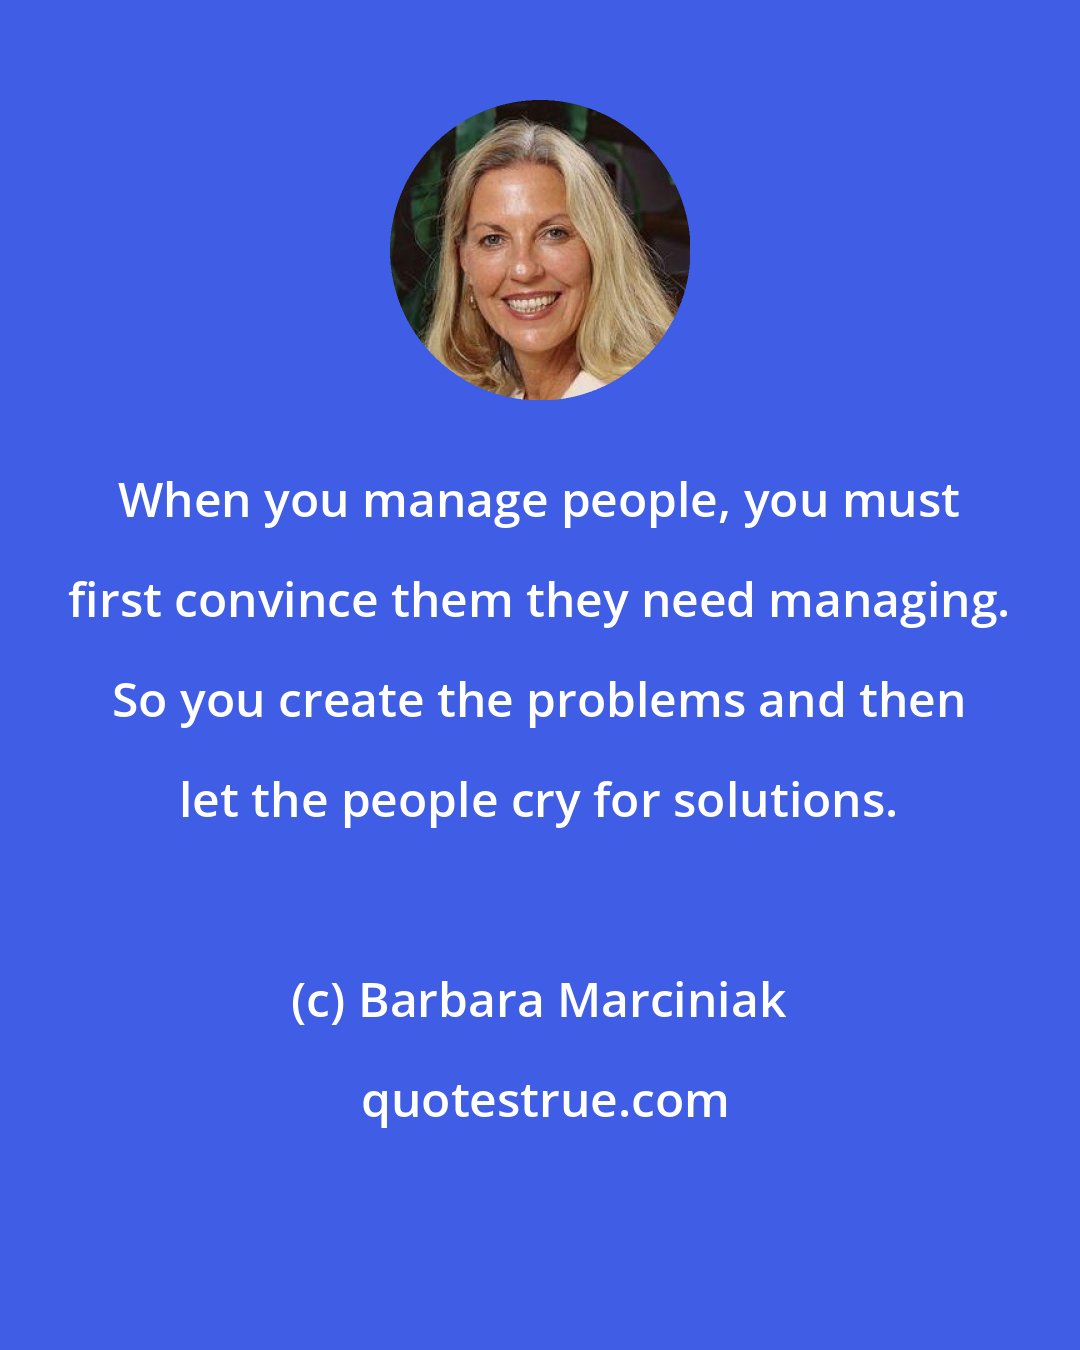 Barbara Marciniak: When you manage people, you must first convince them they need managing. So you create the problems and then let the people cry for solutions.